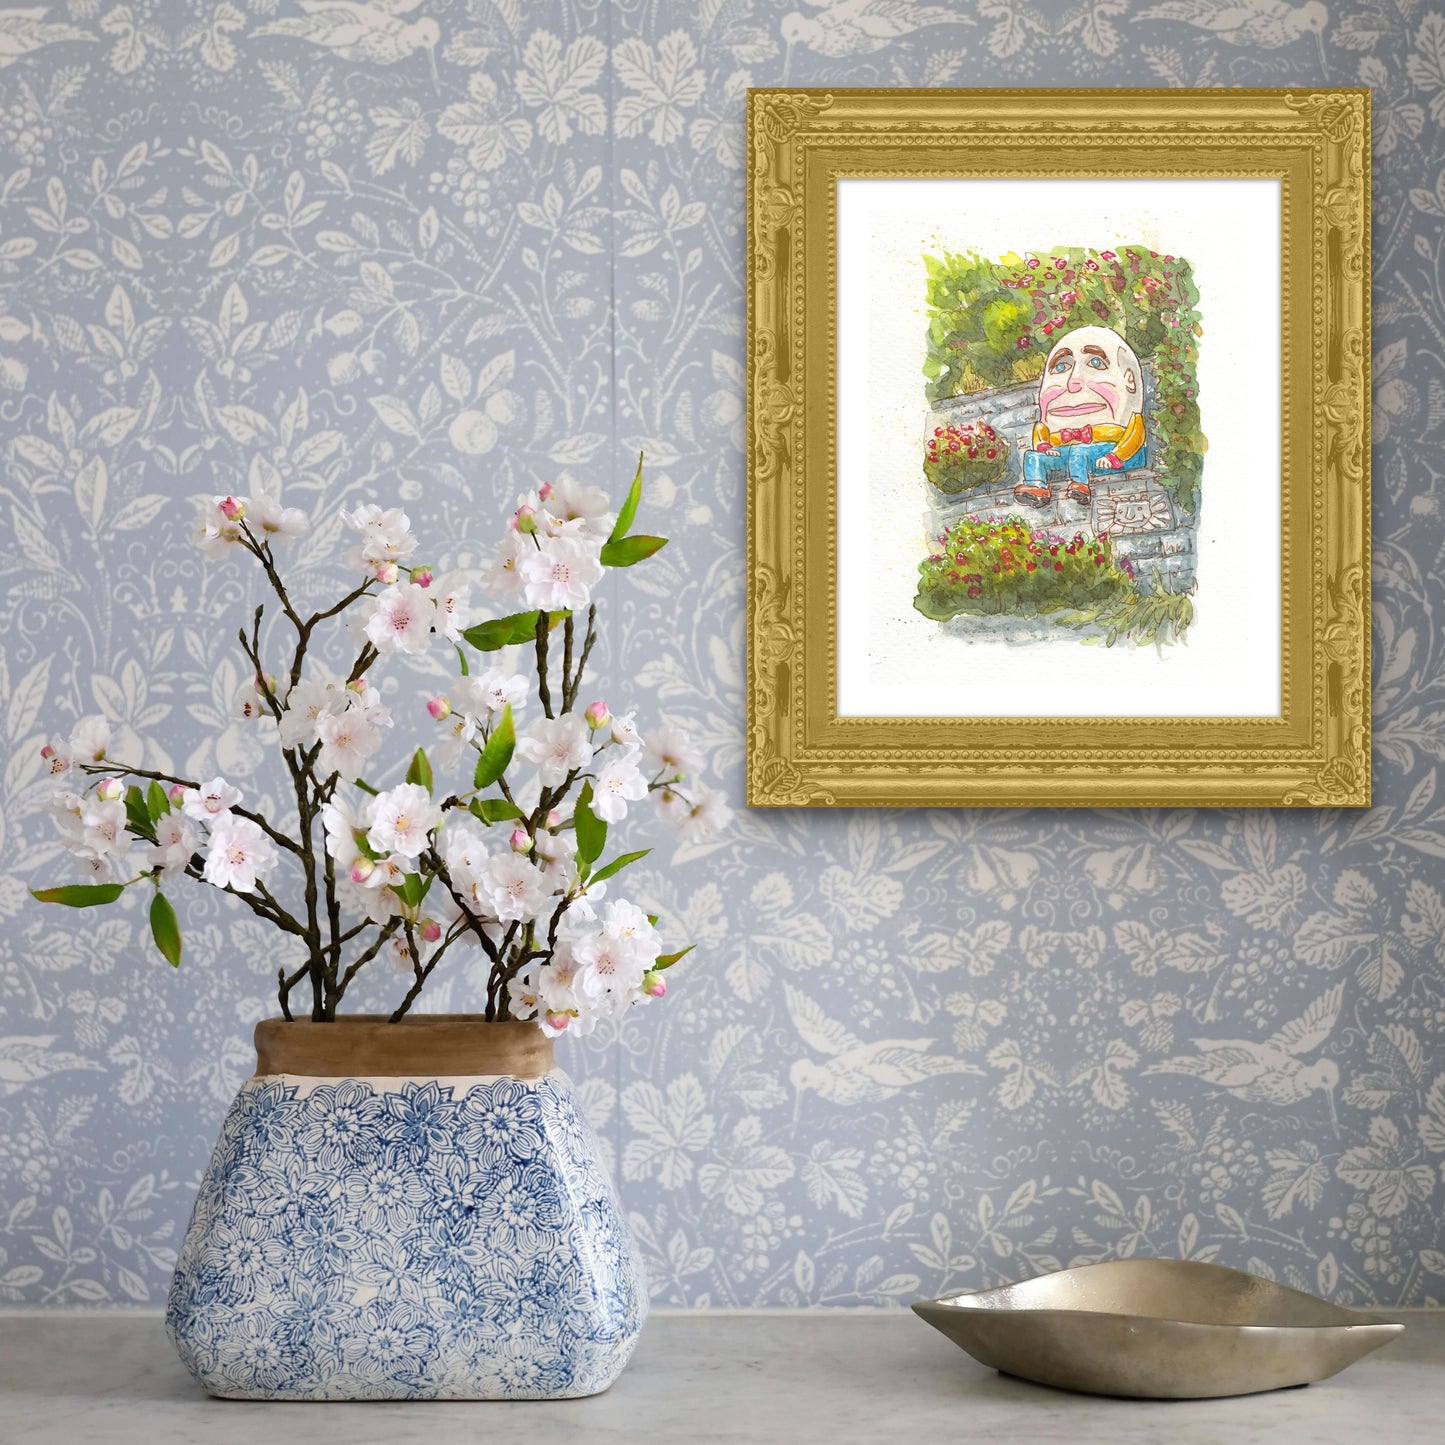 Humpty Dumpty in the rose garden - Signed Open Edition Print by Robert R Norman